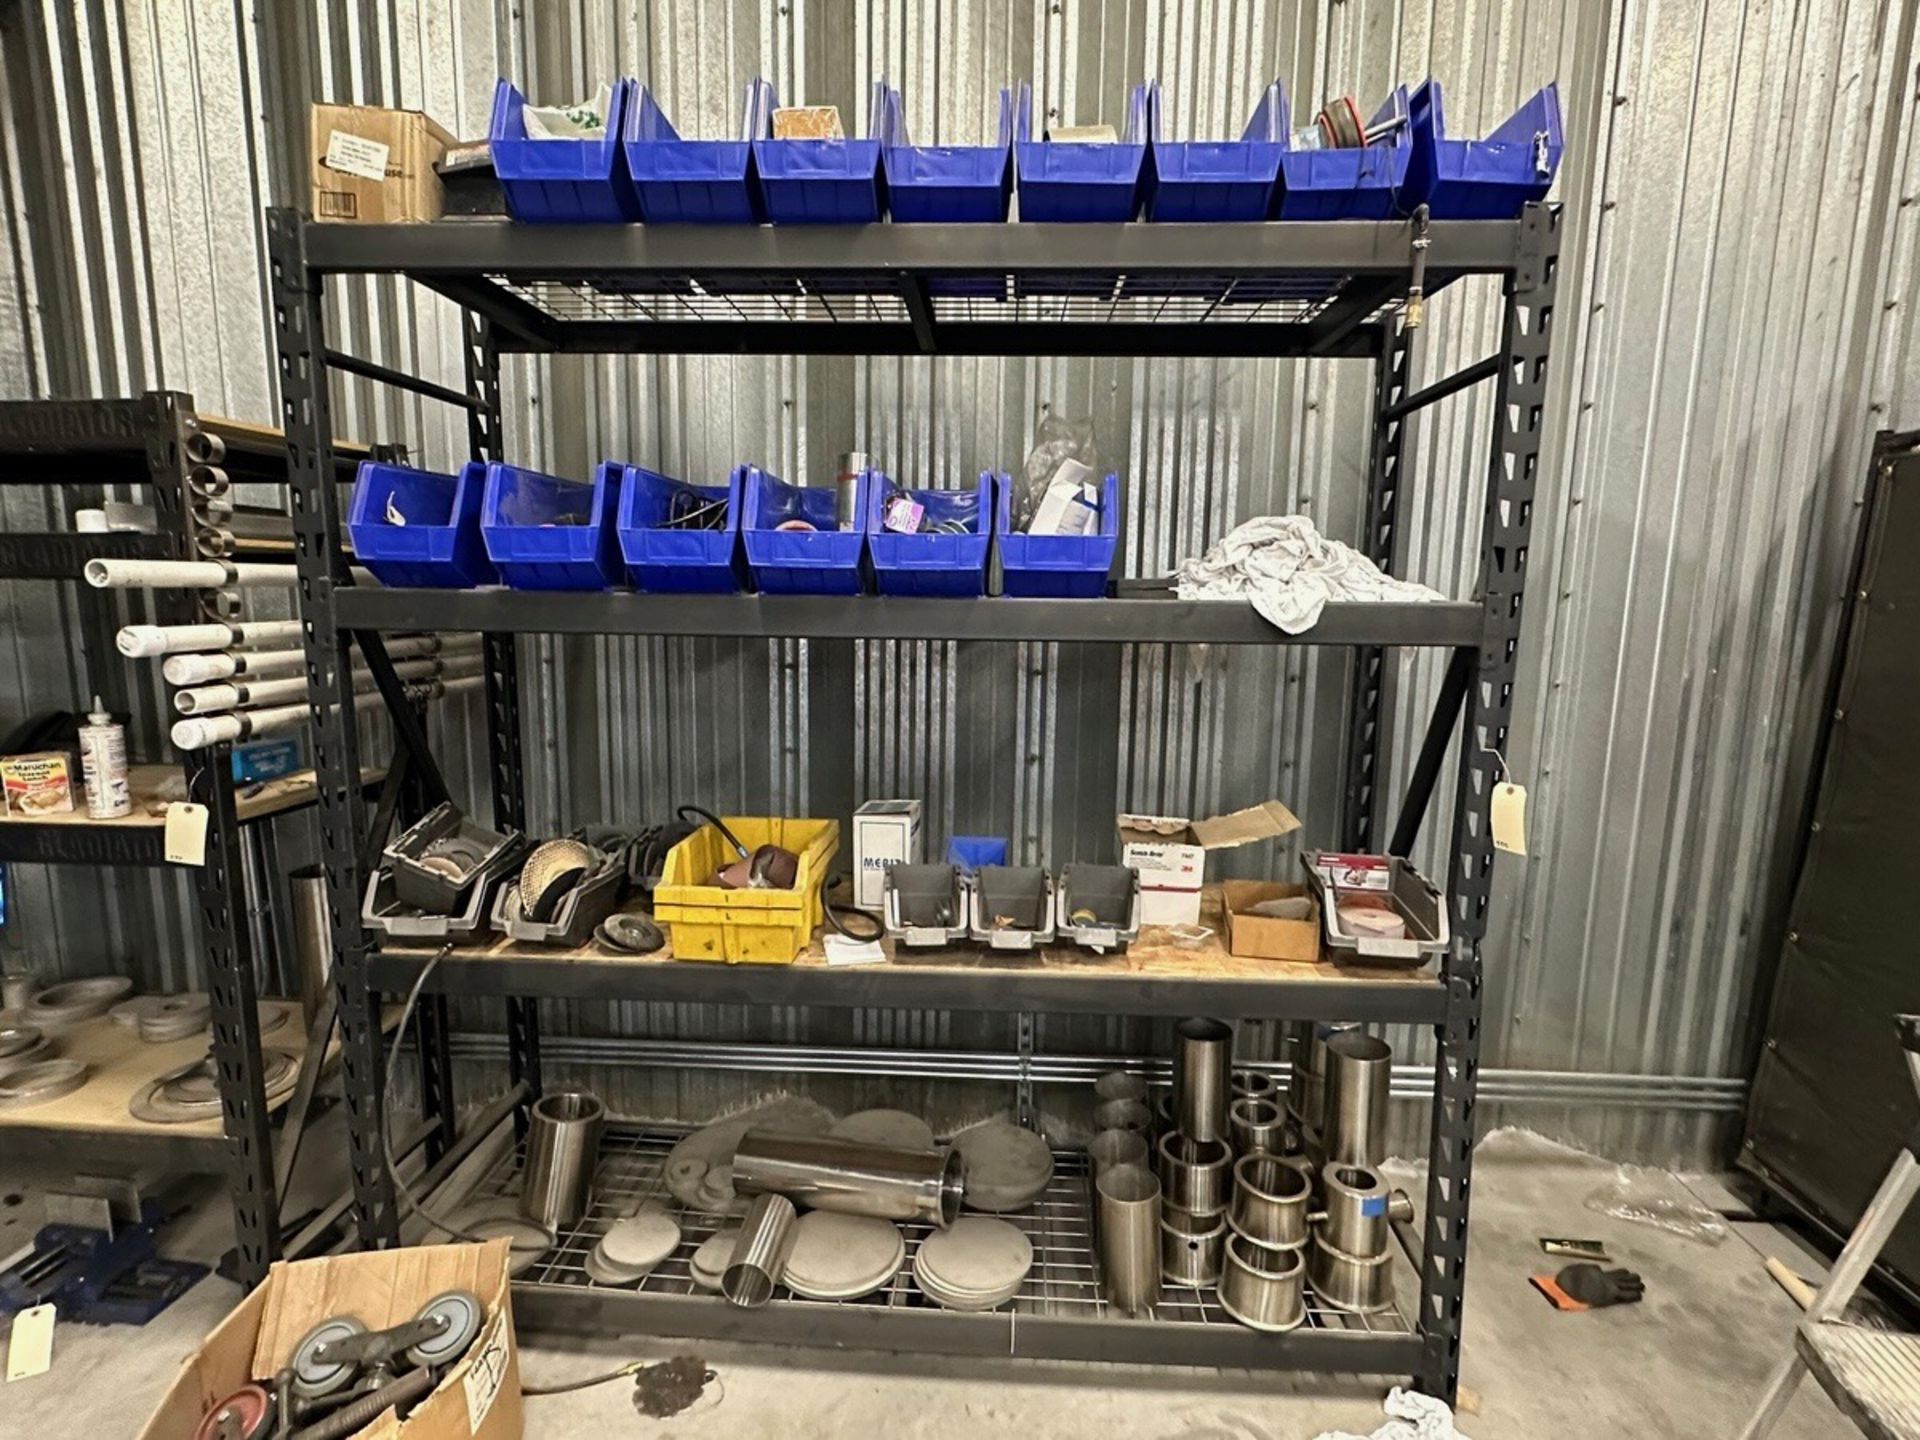 Shelf With Contents, Stainless Steel Fittings | Rig Fee $125